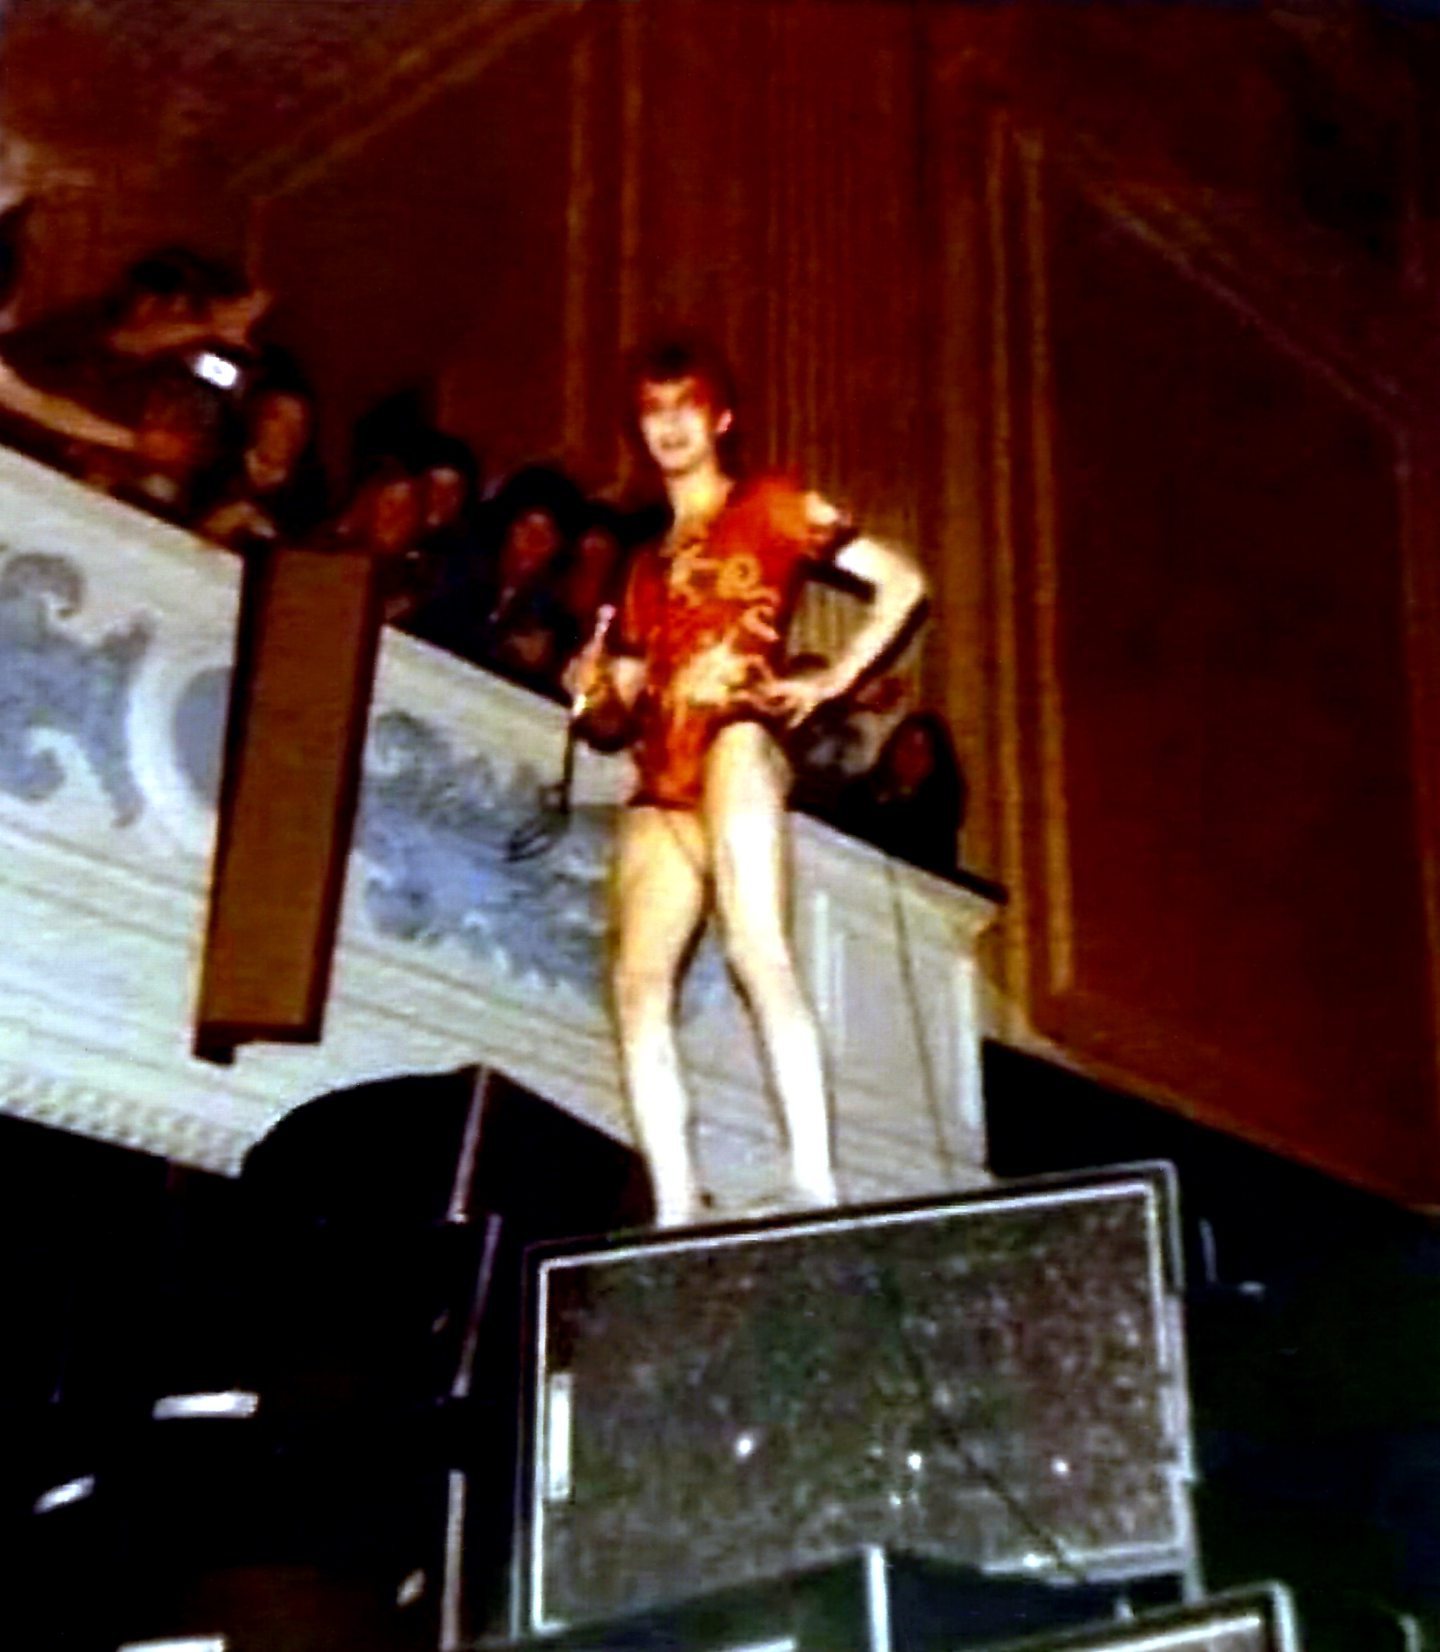 David Bowie performing at the Caird Hall in Dundee in 1973. Image: Retro Dundee.